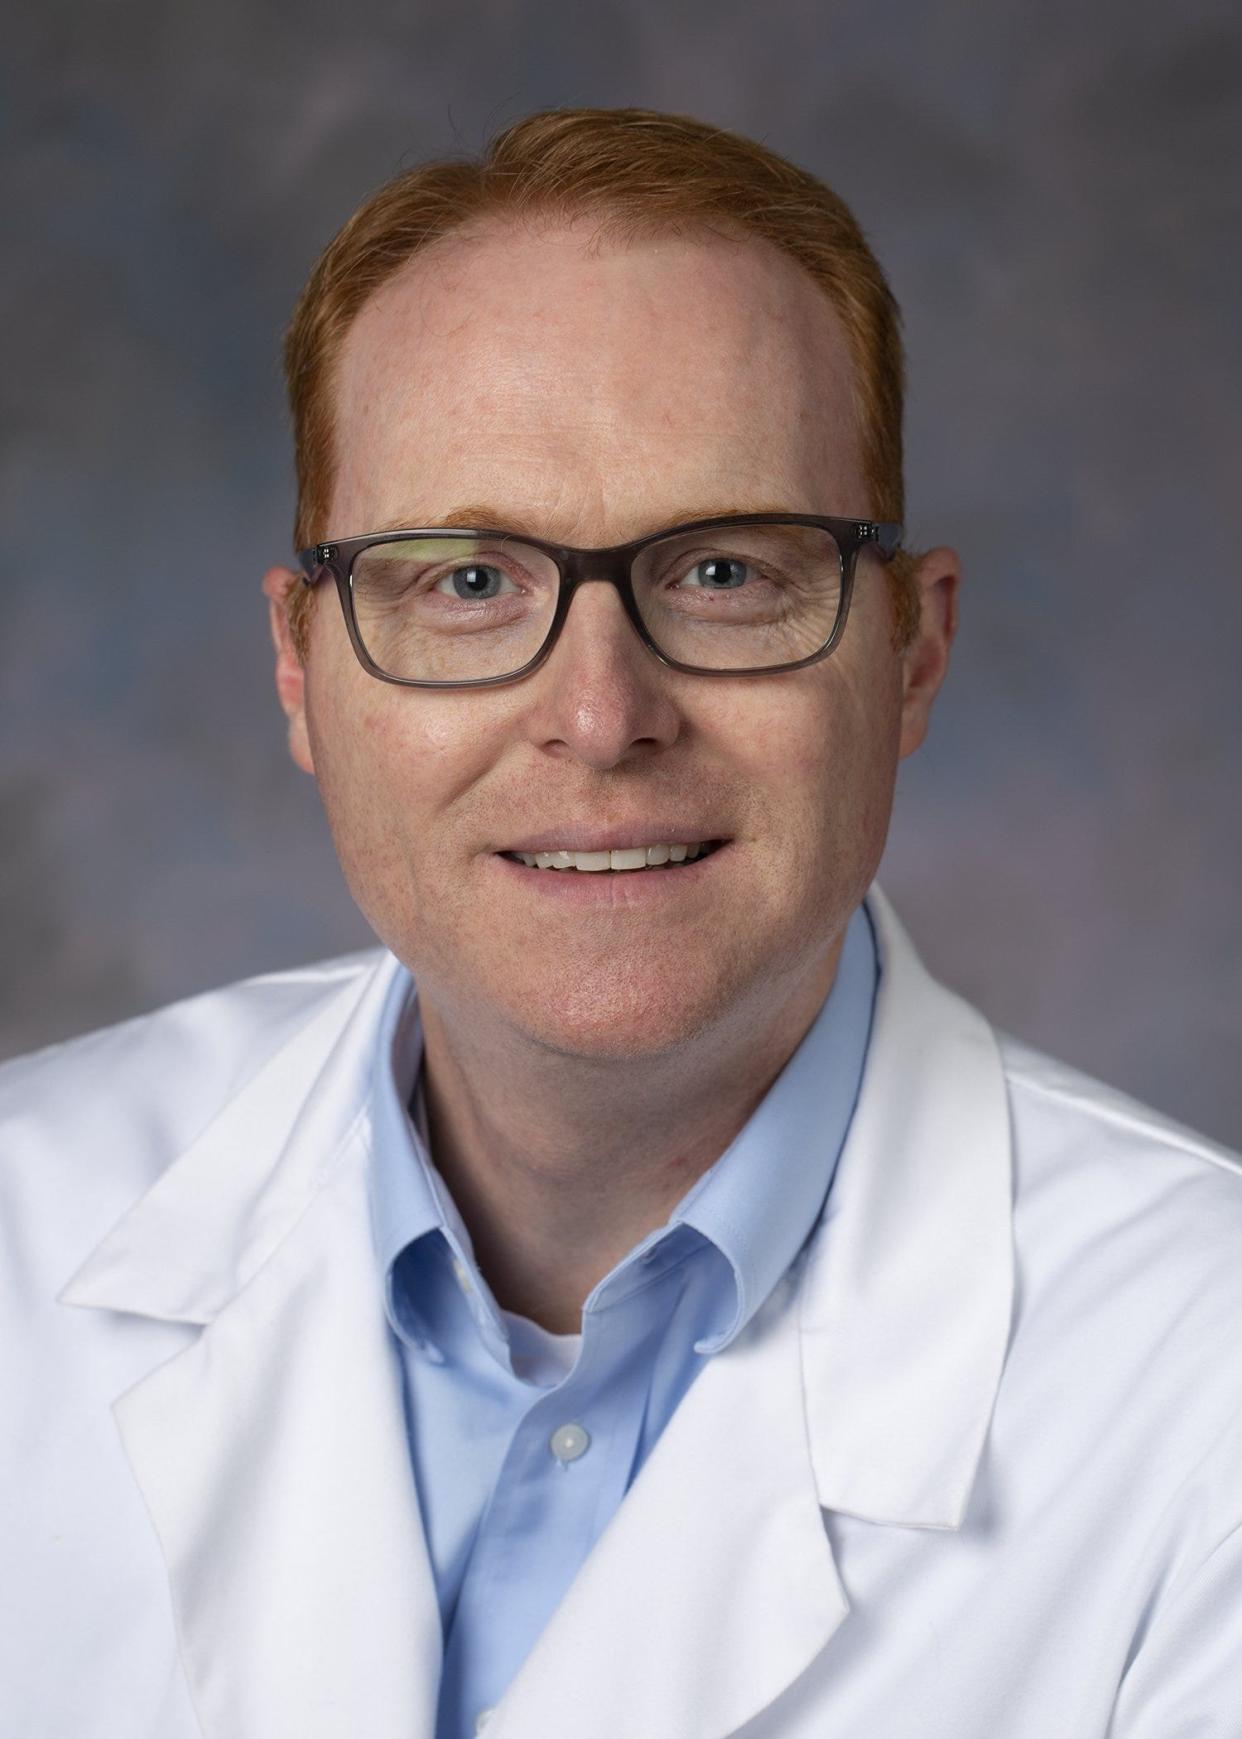 Dr. David Rogers is chief of Nationwide Children’s Hospital's Department of Pediatric Ophthalmology.